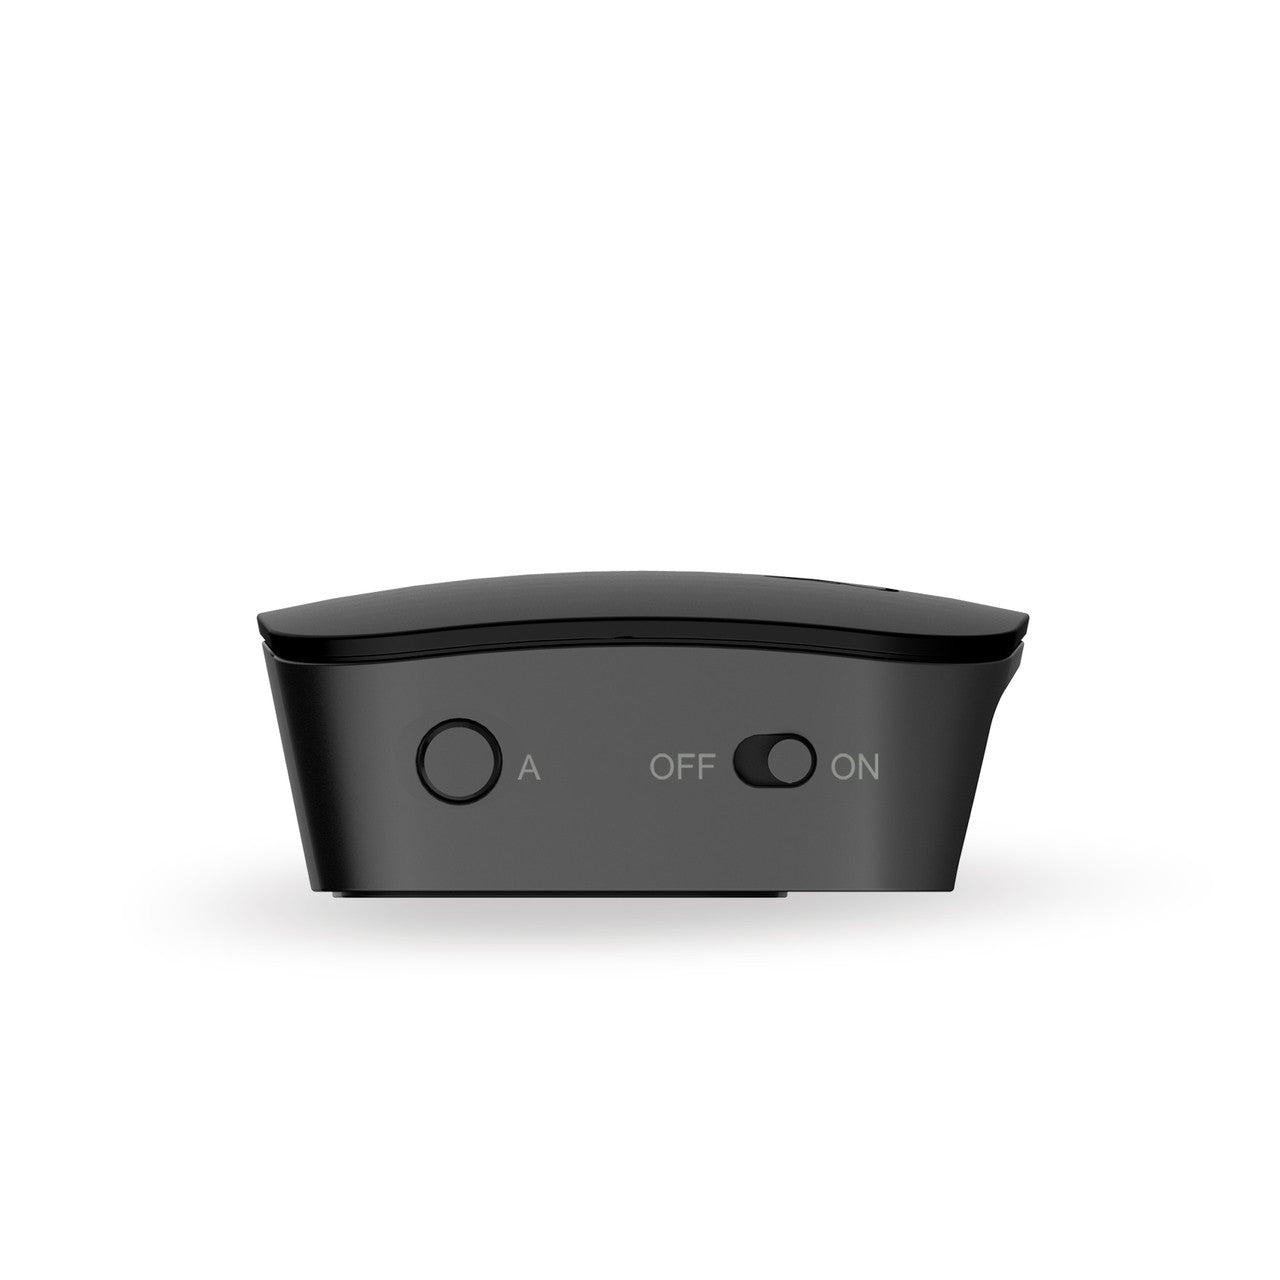 Image of Connect Bluetooth Audio Transmitter for TV.